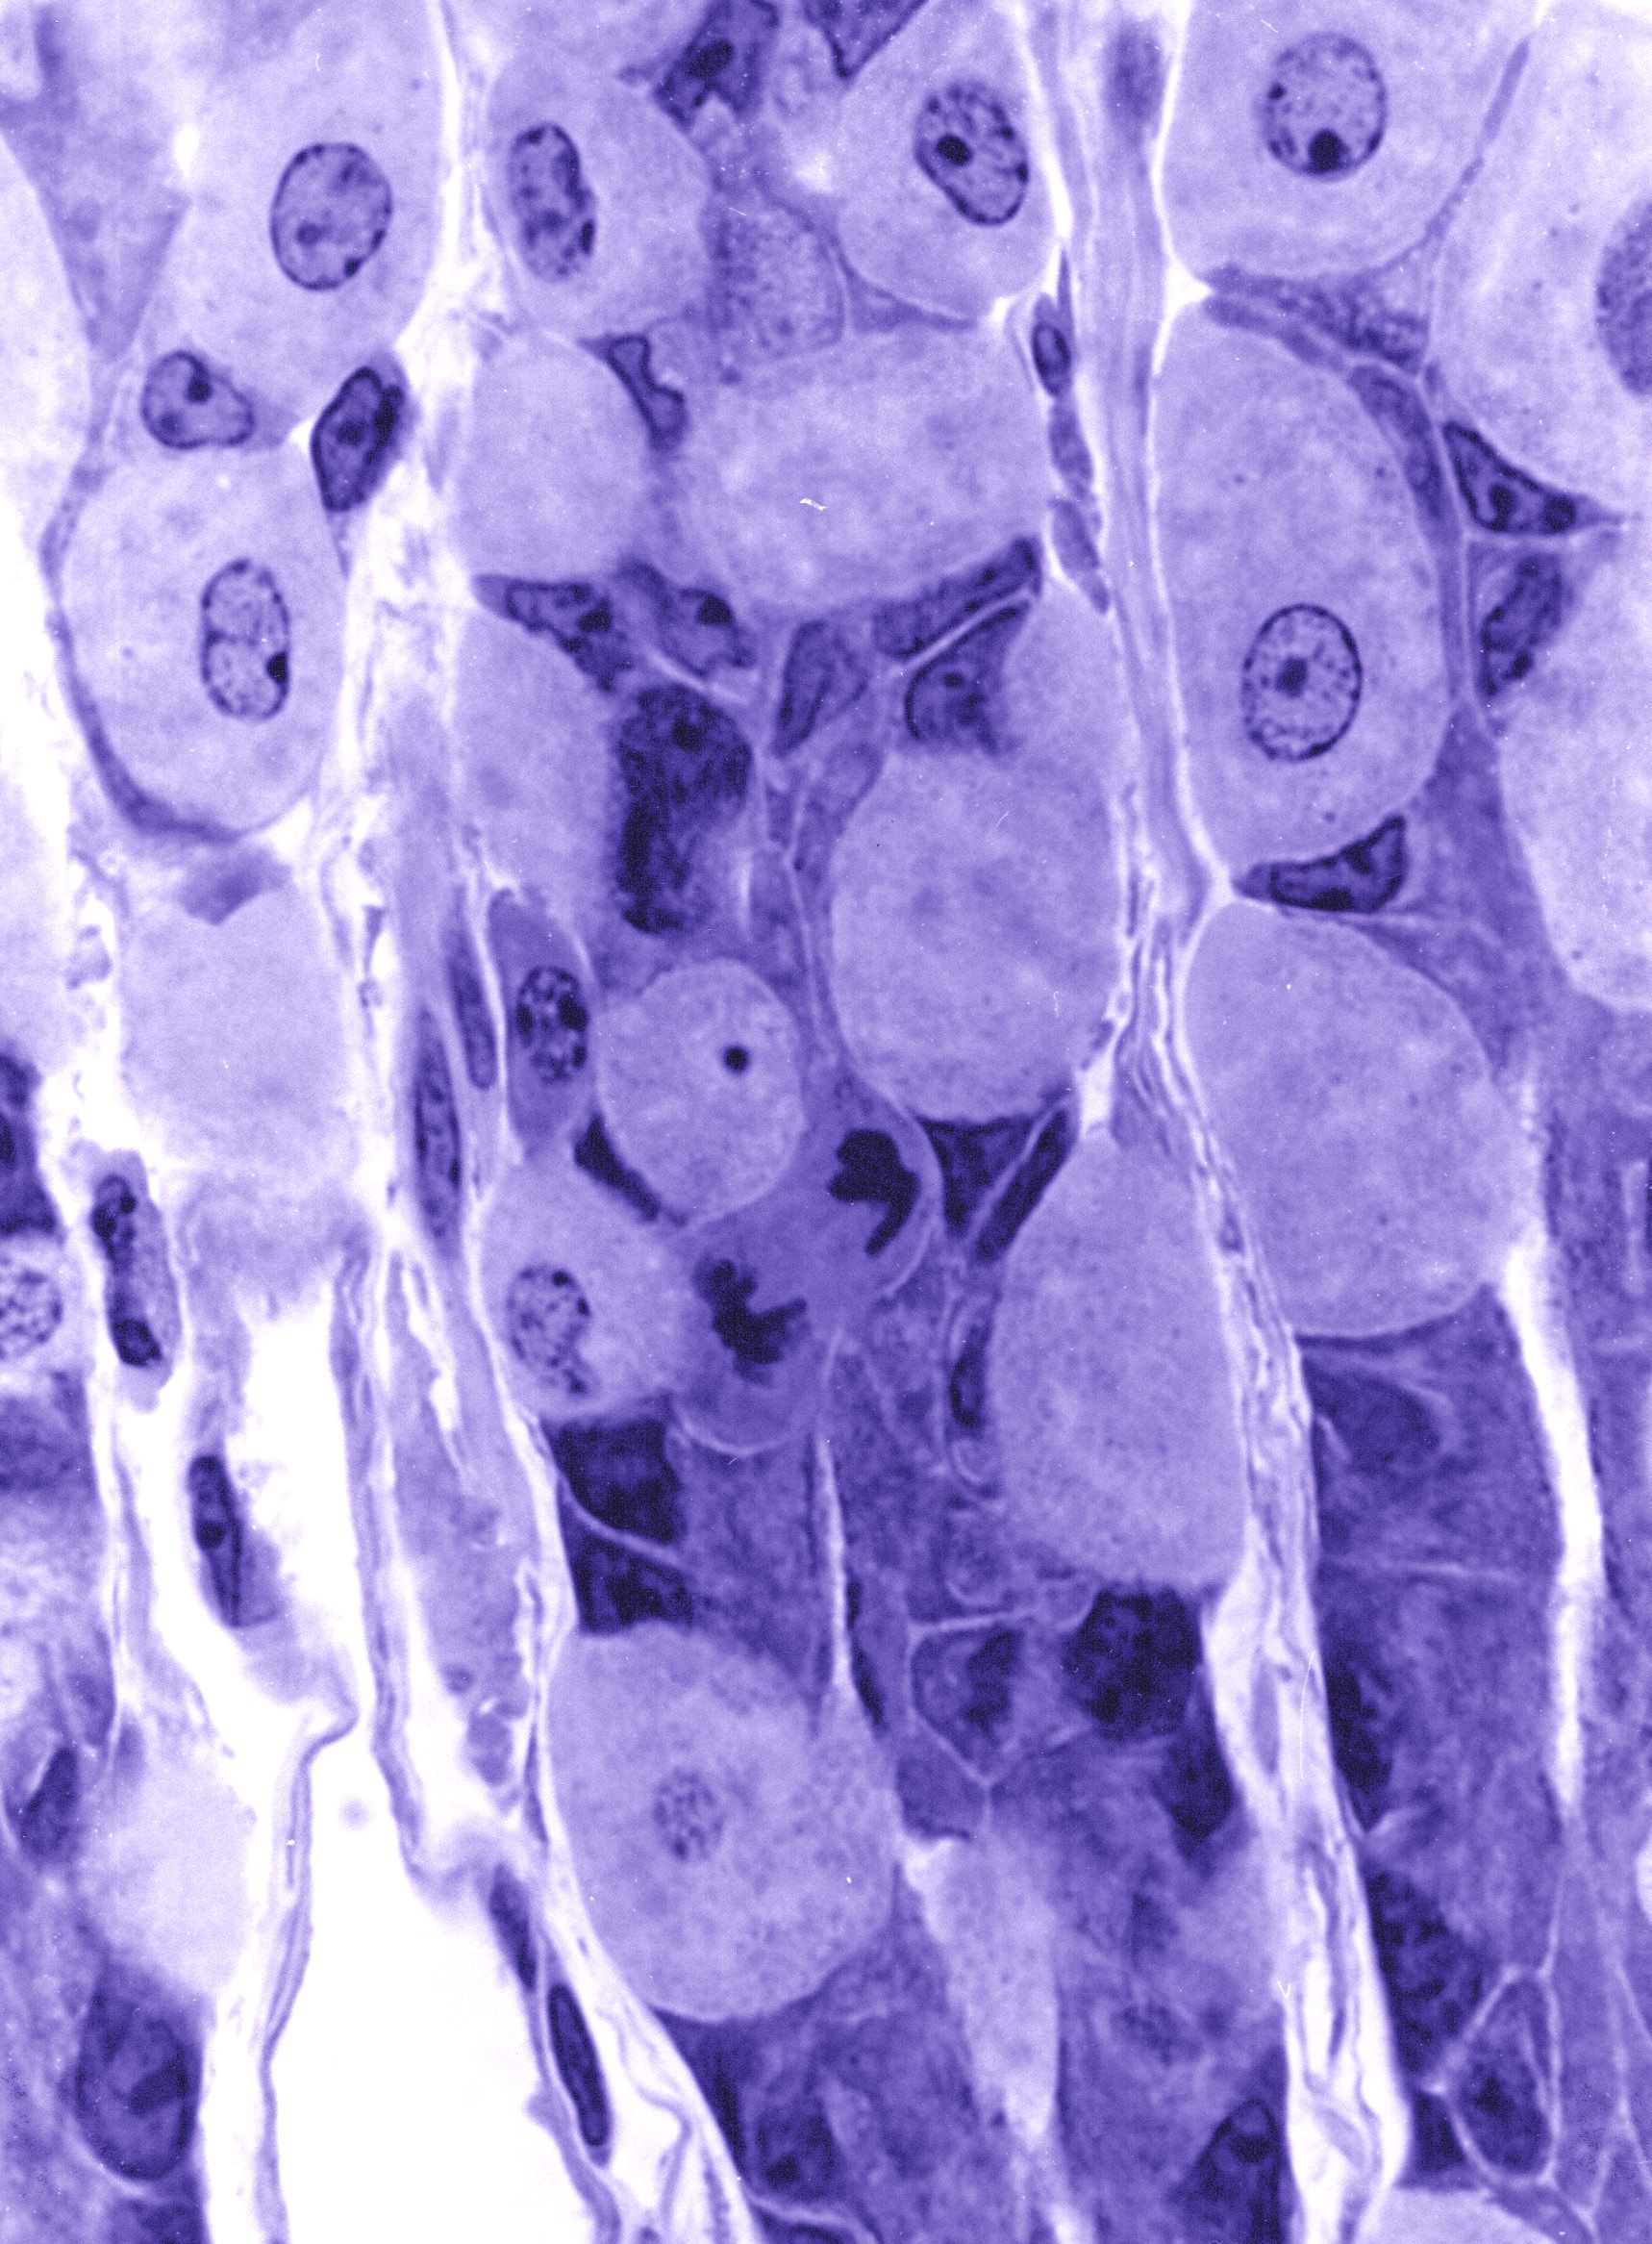 Microscopy image of the gastric glands of the lining of the stomach, courtesy of Dr R W Banks